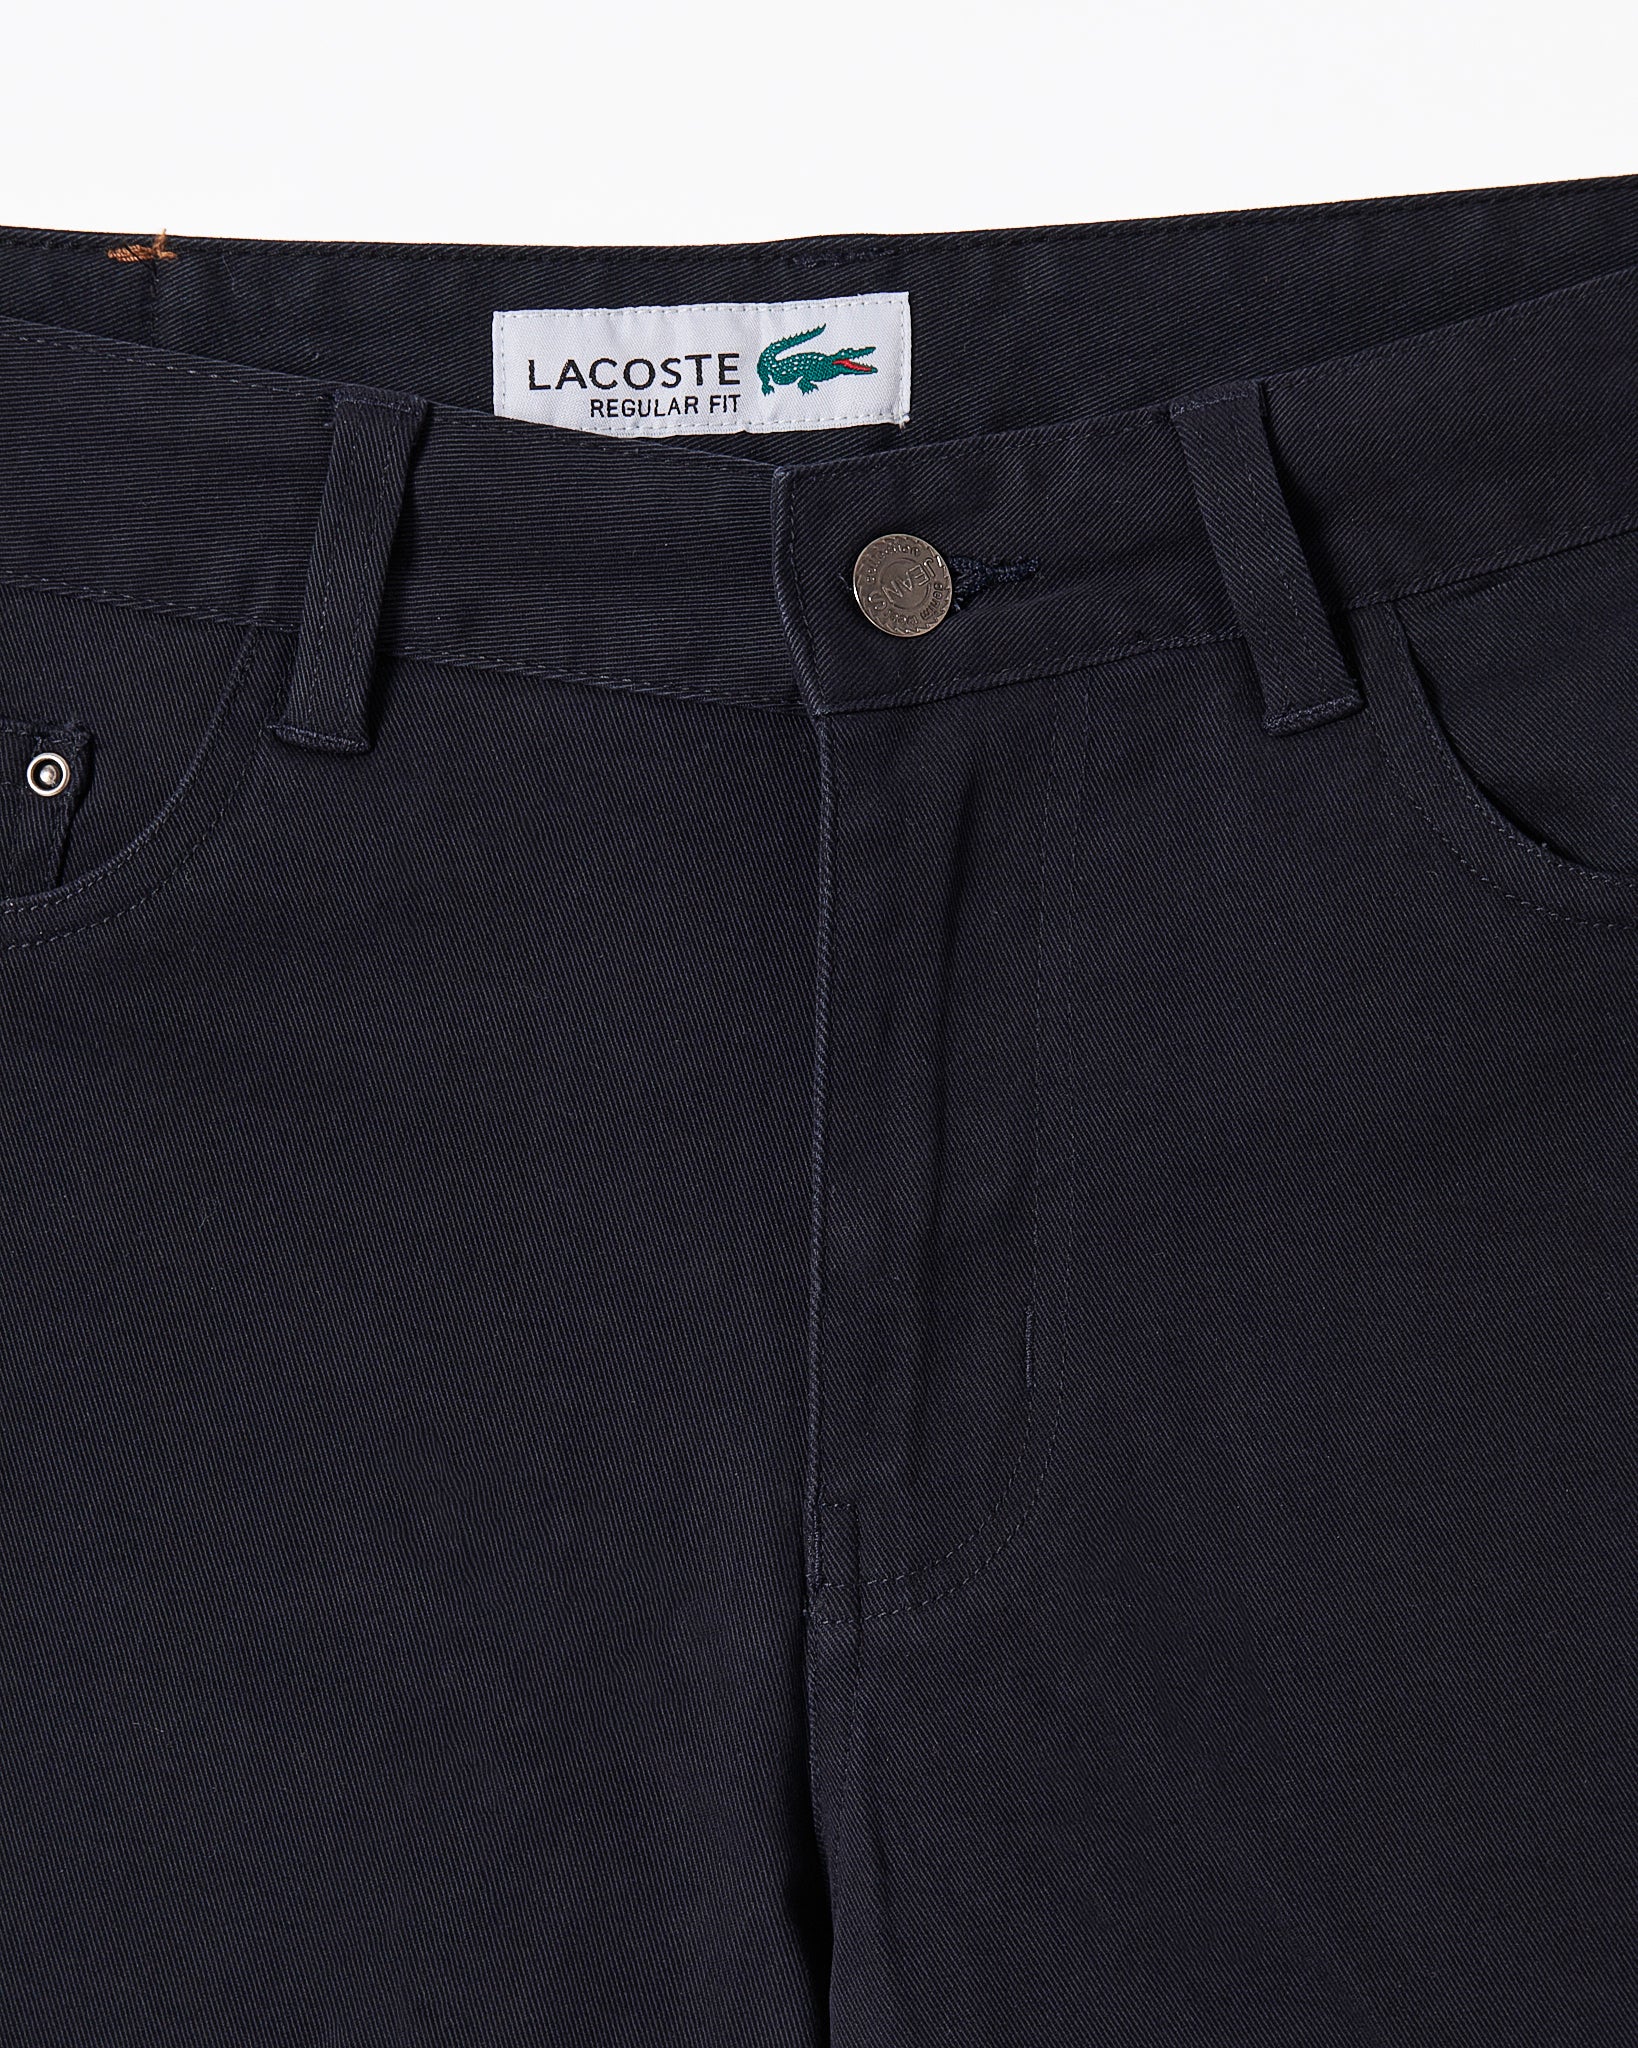 LAC Stretchy Men Dark Blue Casual Fit Jeans 24.90